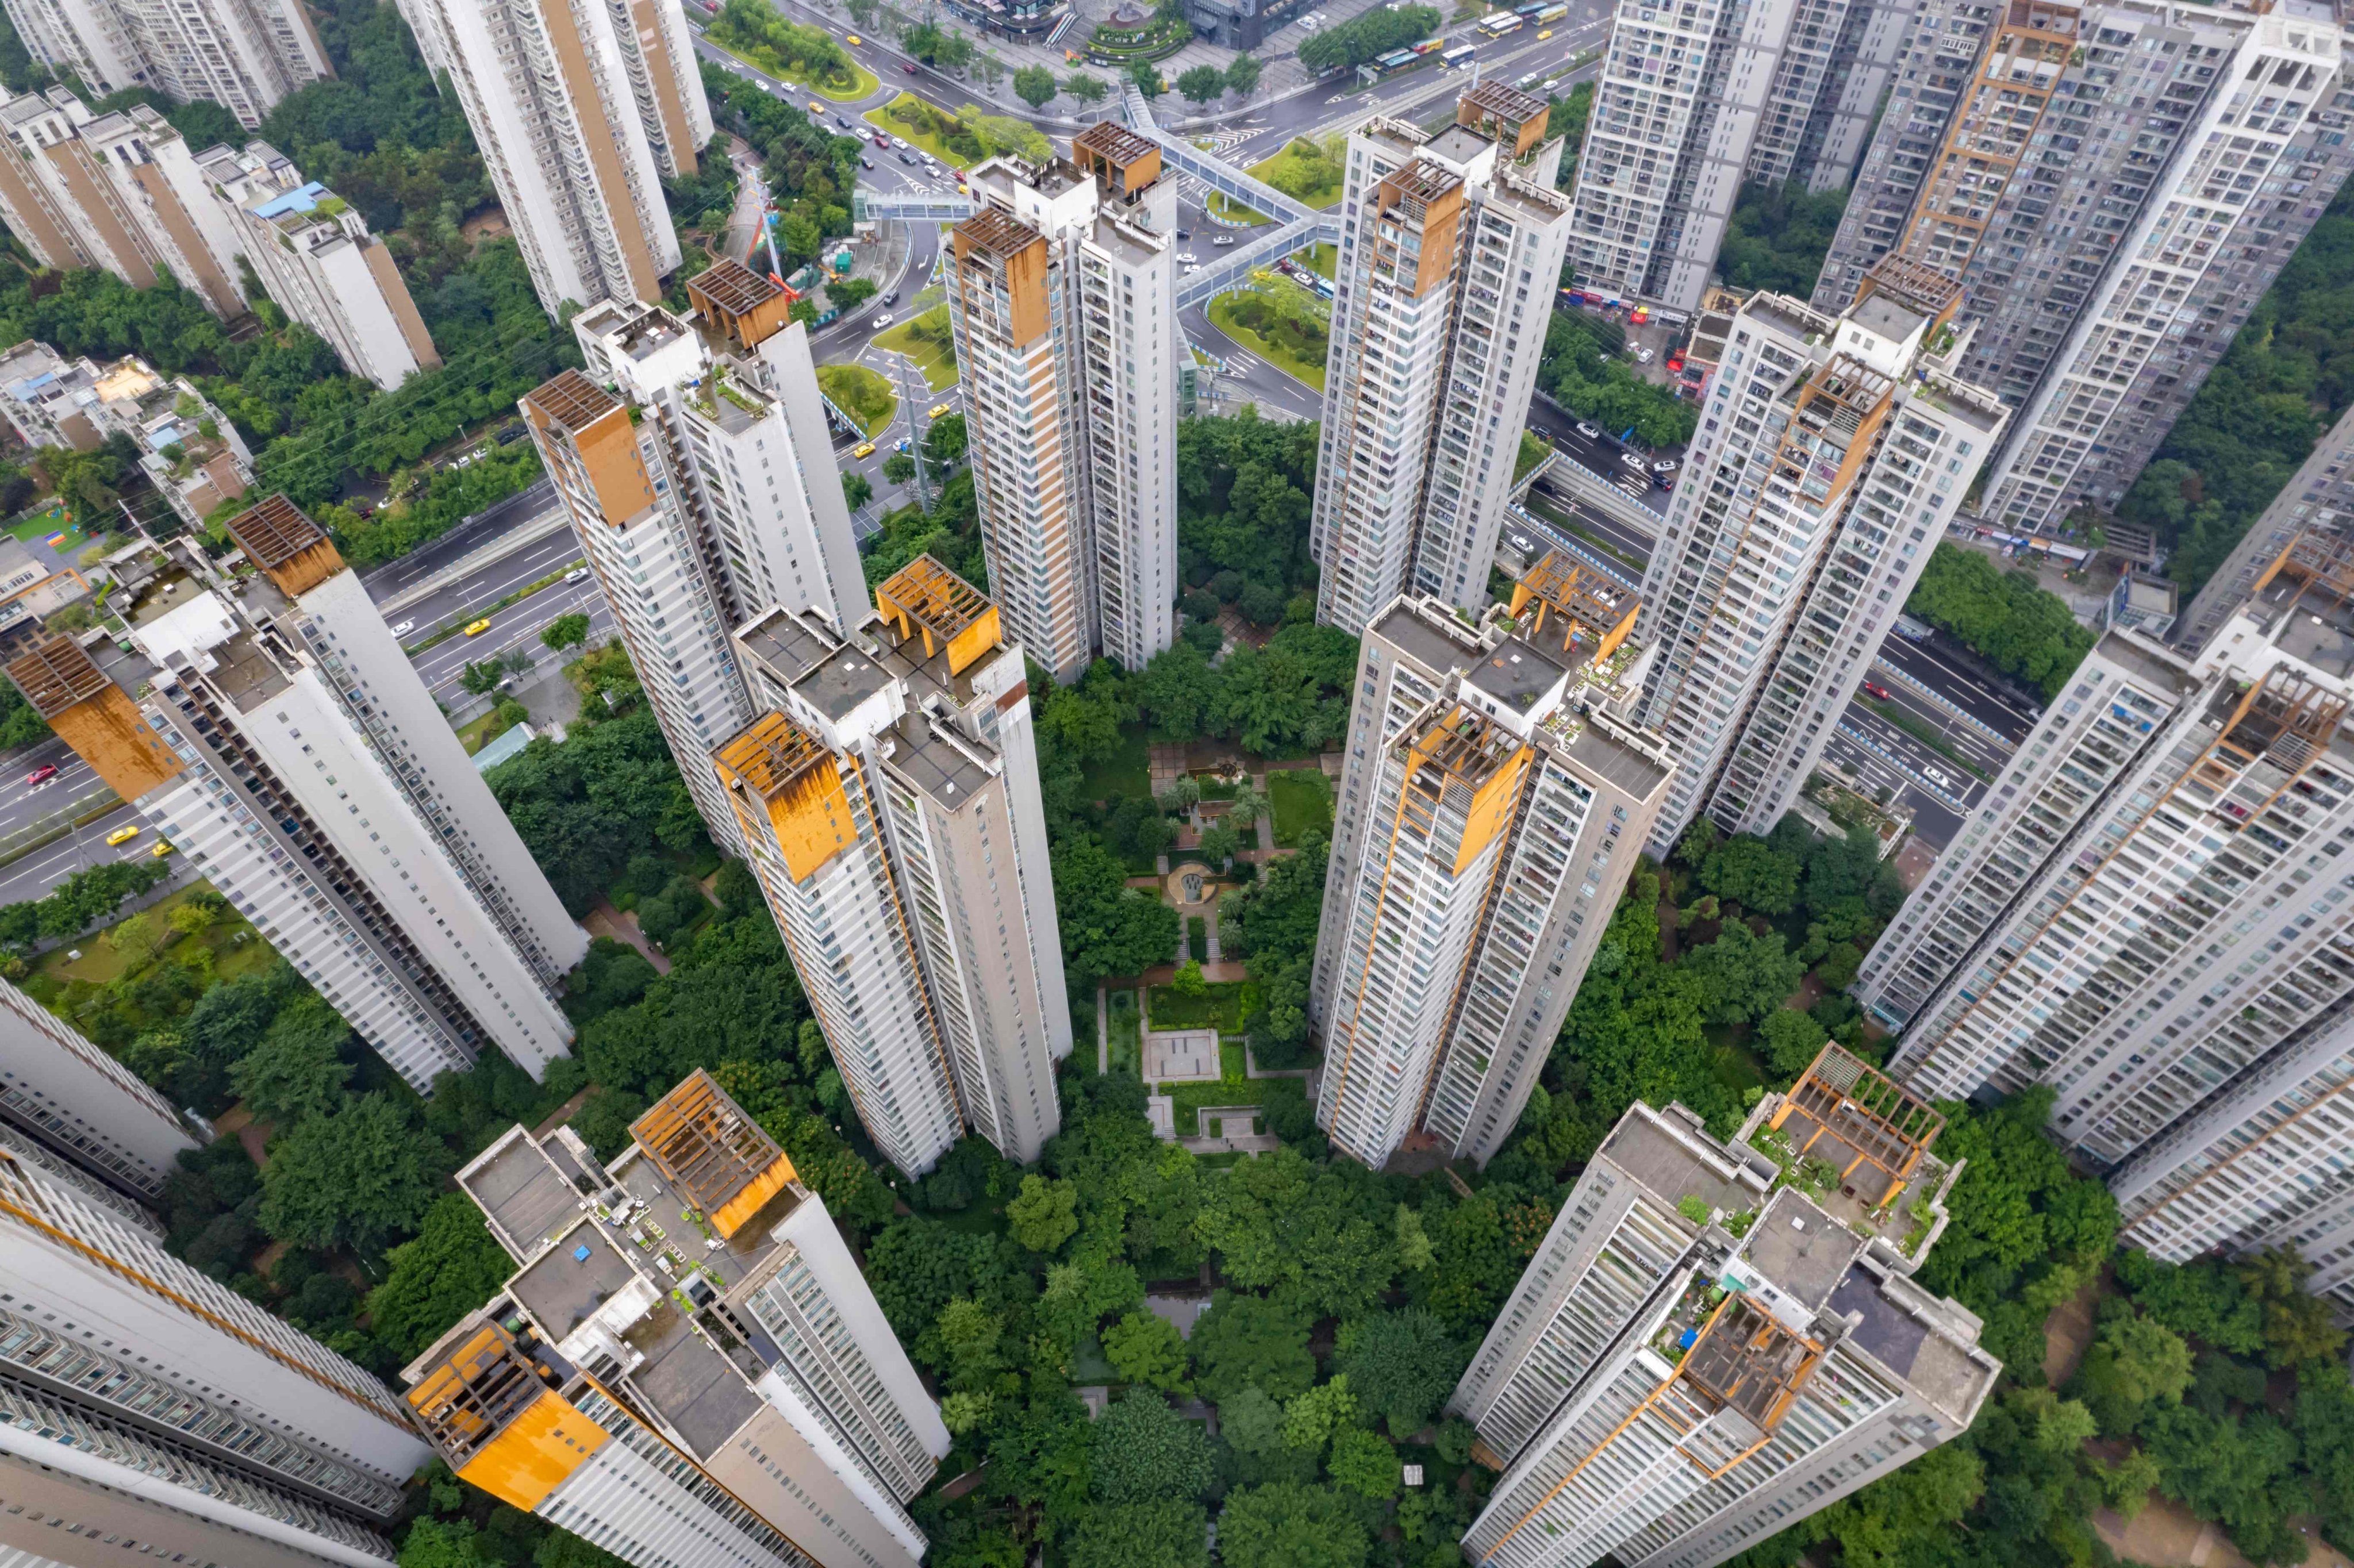 Residential buildings in Chongqing, in southwest China. Photo:AFP